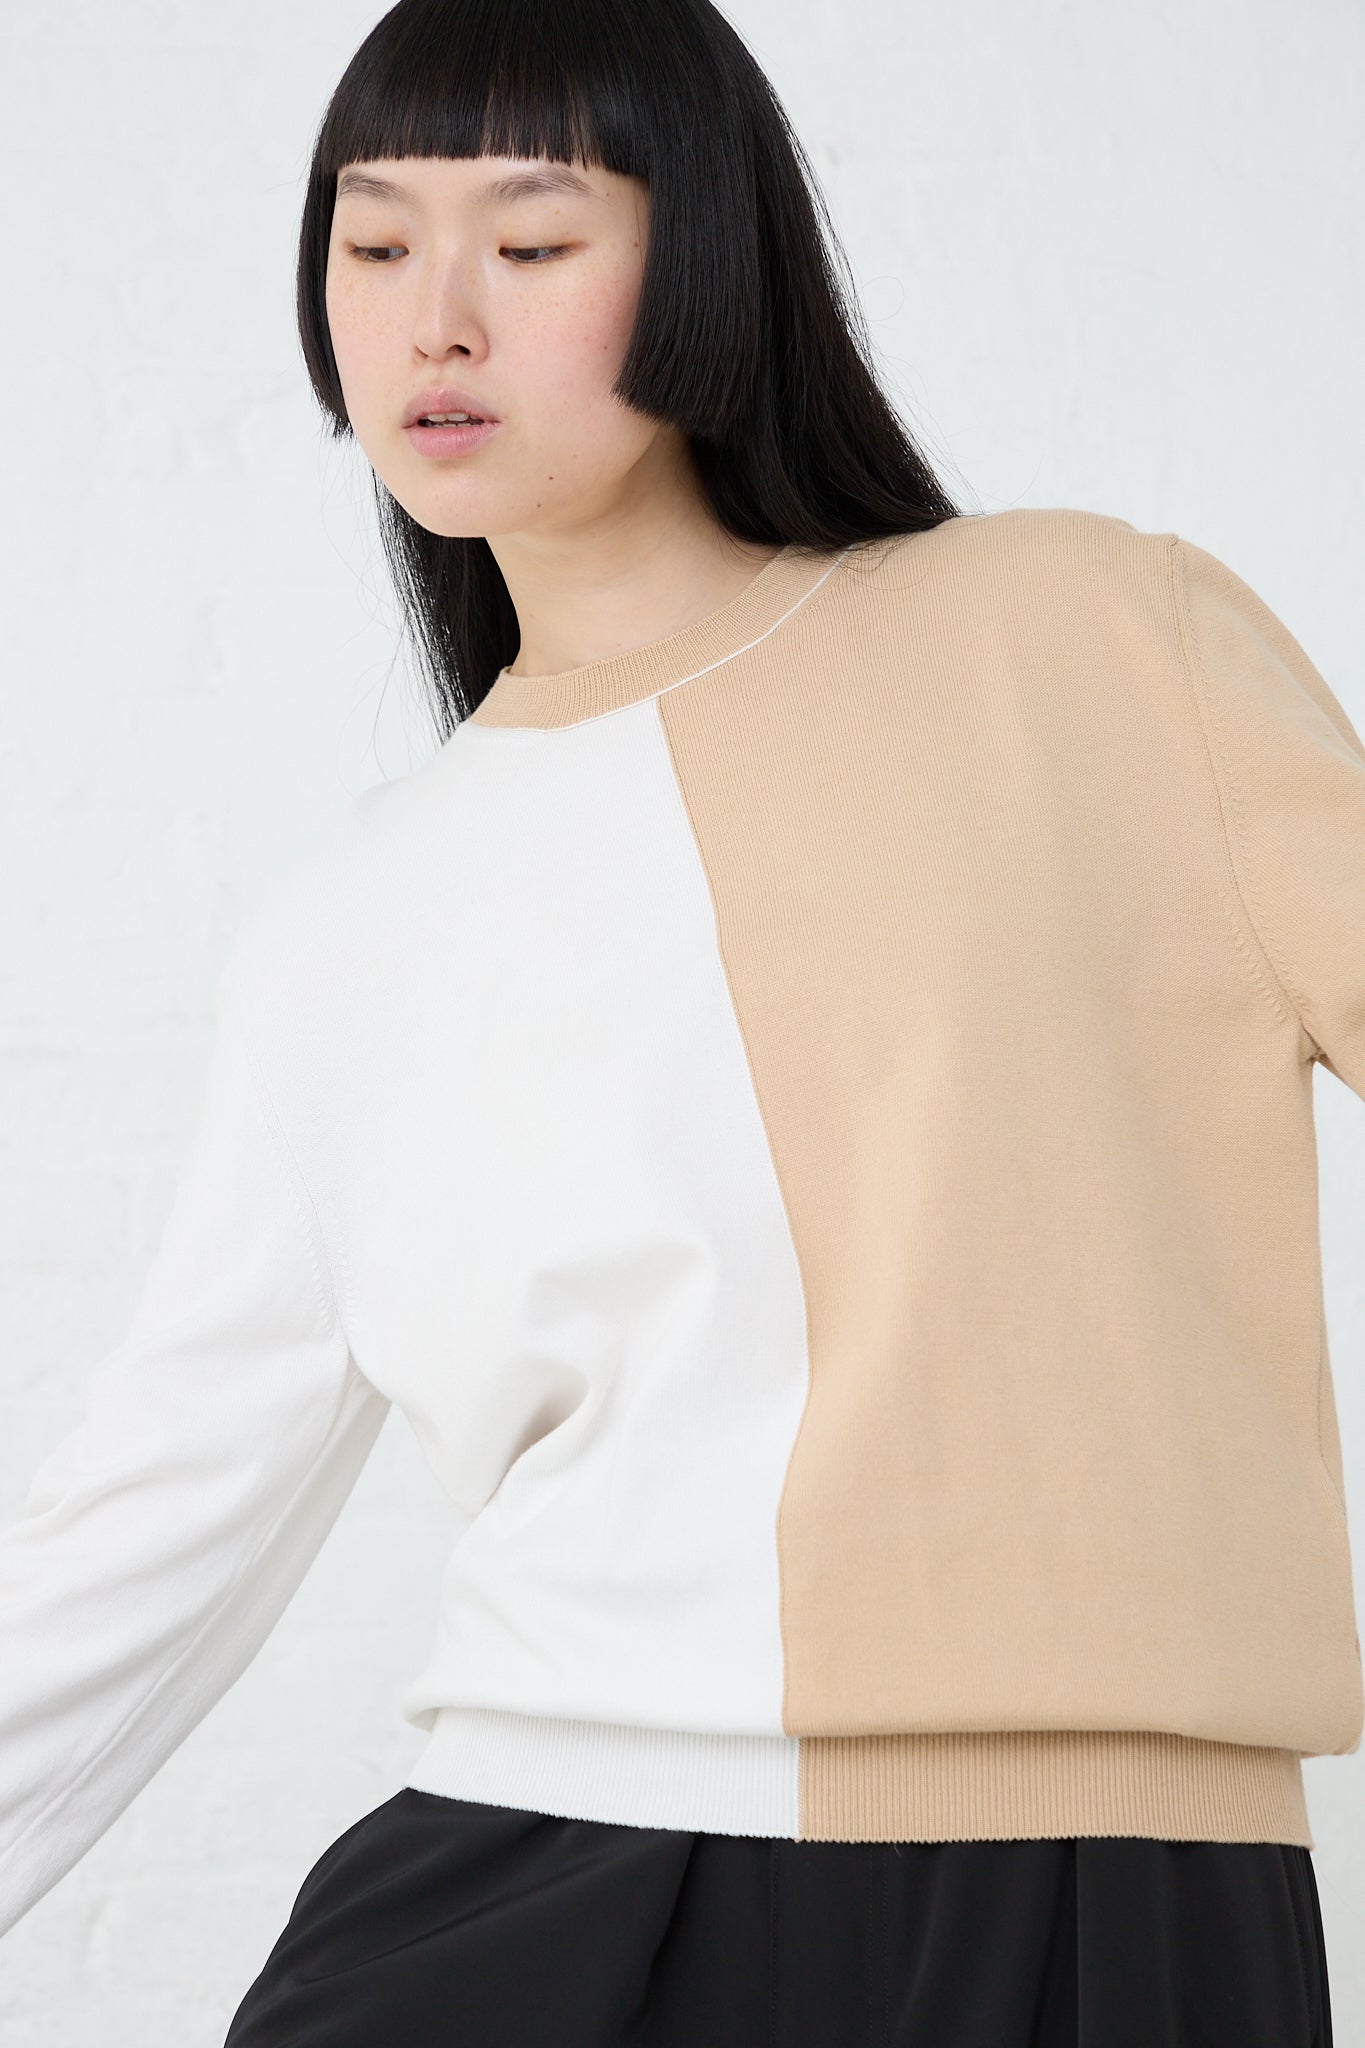 The model is wearing a relaxed fit bi-color MM6 crewneck in Beige Off White.